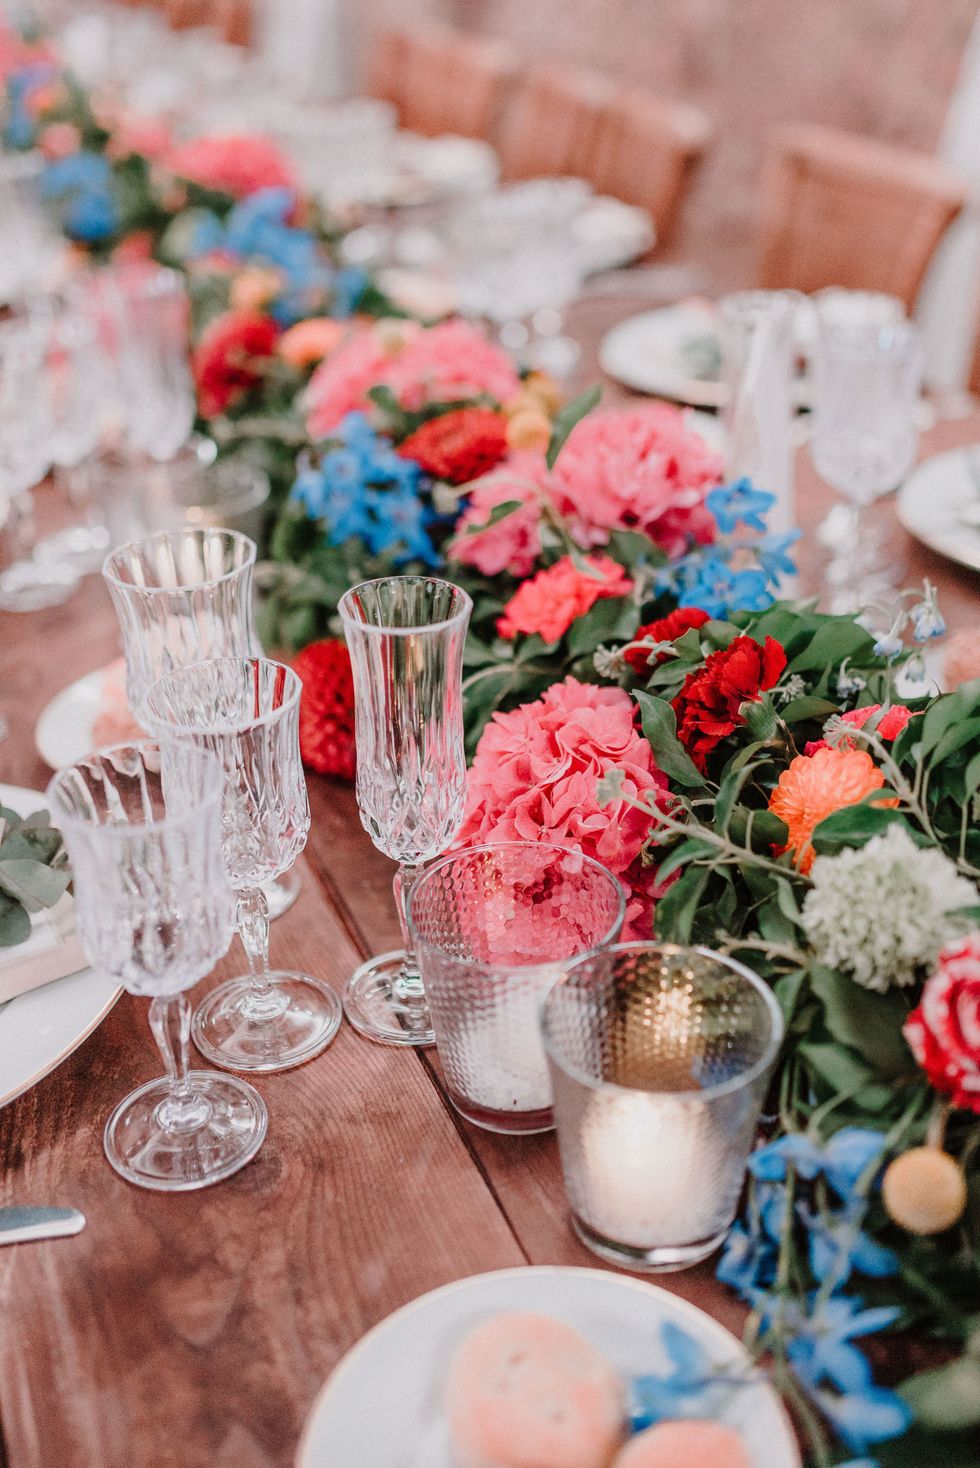 Photograph, Turquoise, Red, Pink, Rehearsal dinner, Flower, Centrepiece, Champagne stemware, Event, Wedding reception, 